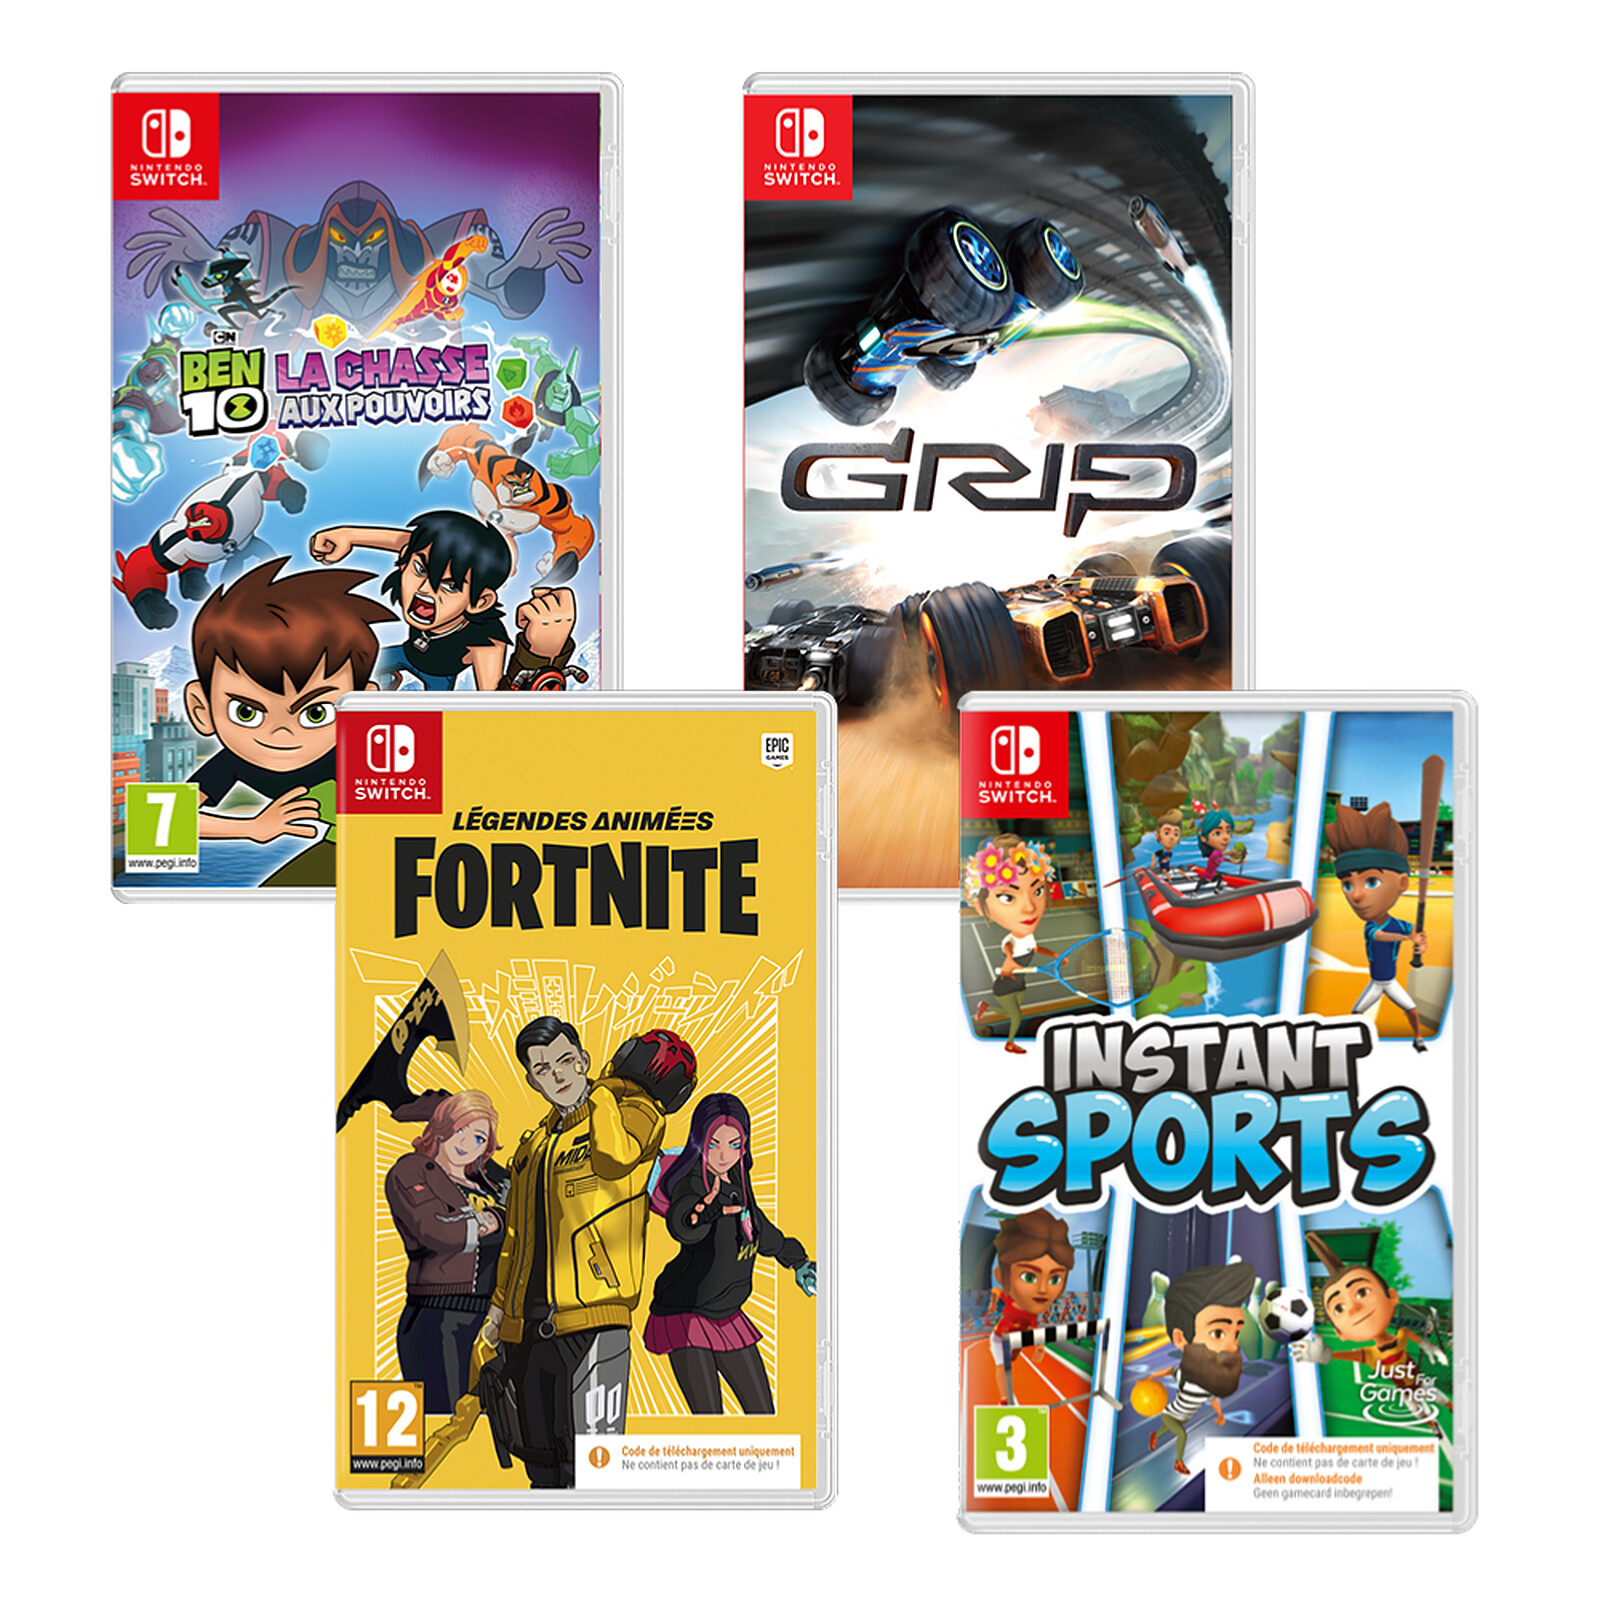 Disney Classic Games Collection (SWITCH) - Jeux Nintendo Switch - LDLC